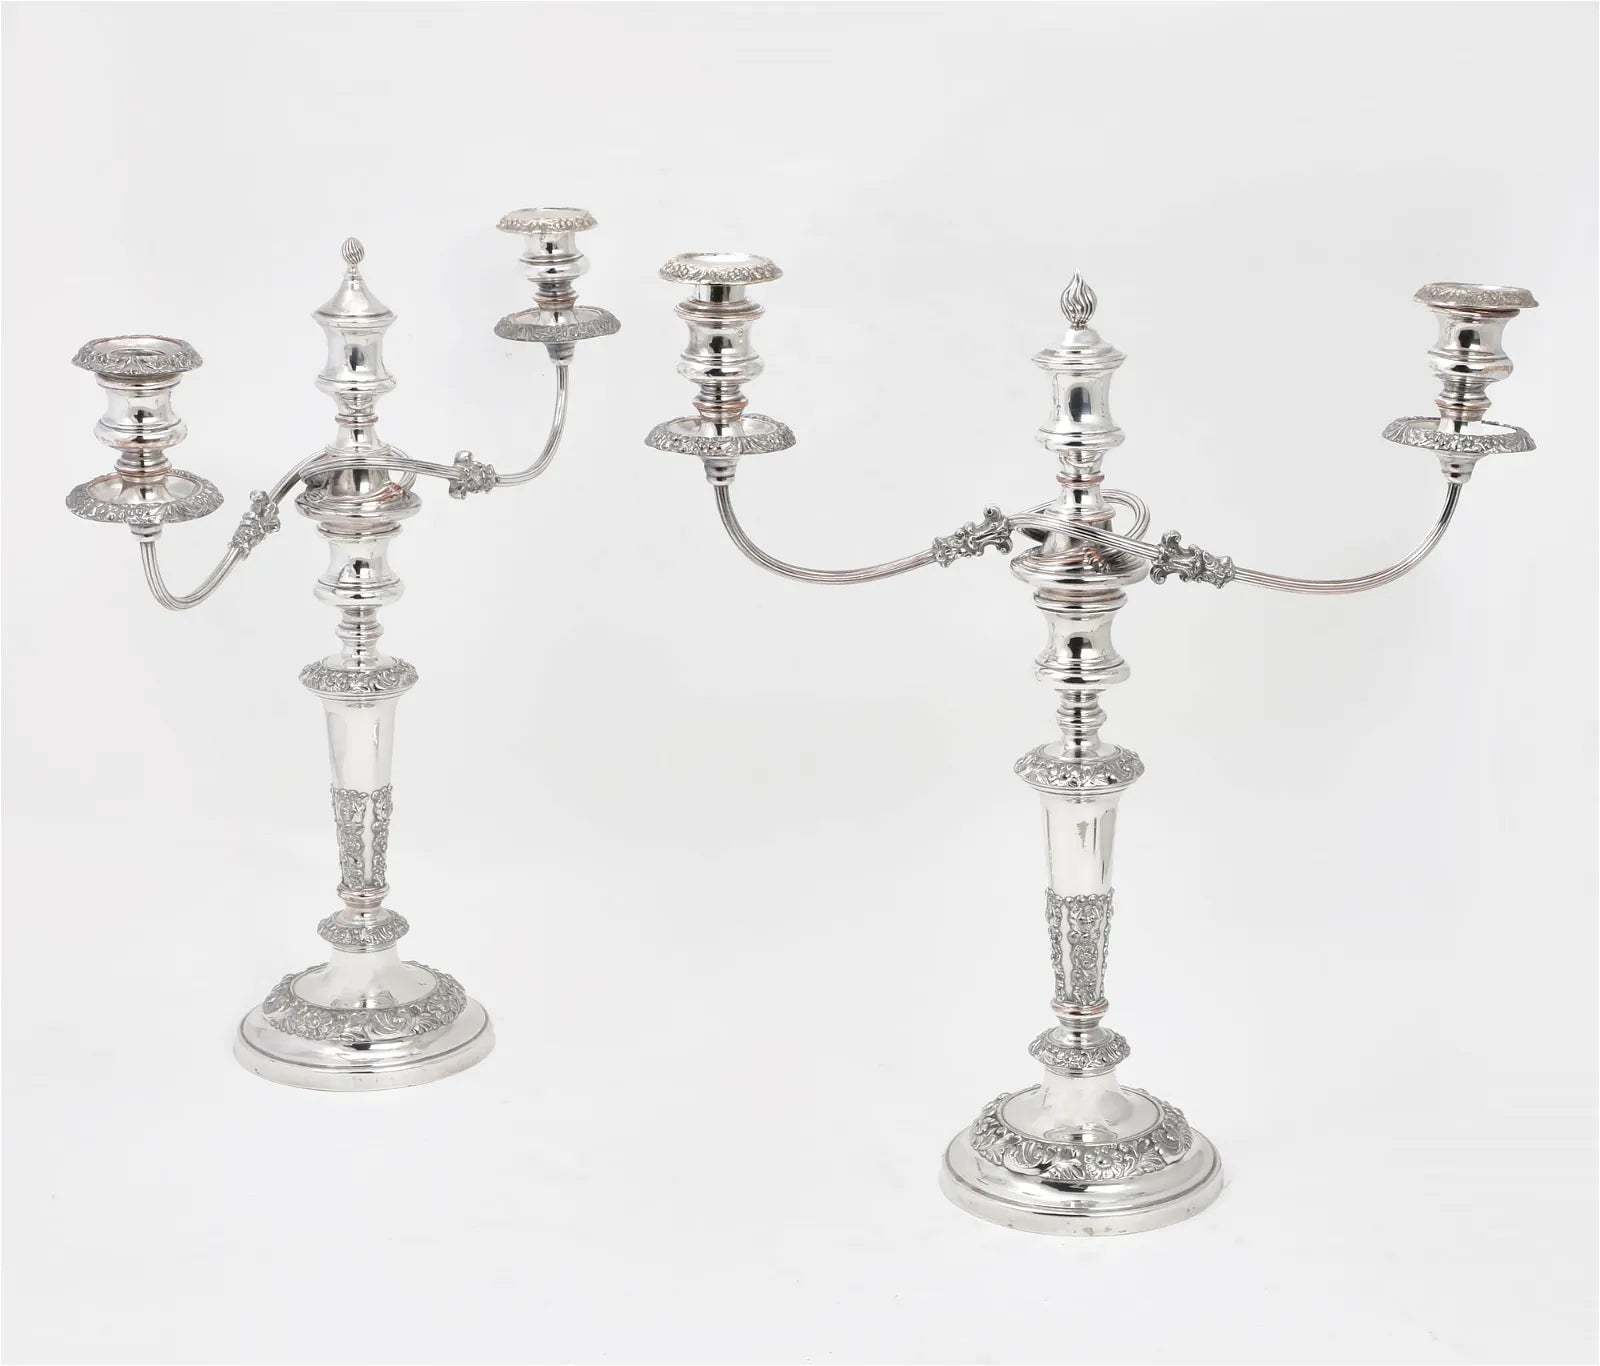 DA2-022: PAIR OF LATE 19TH CENTURY ENGLISH SILVER PLATE CONVERTIBLE THREE LIGHT CANDLEABRA